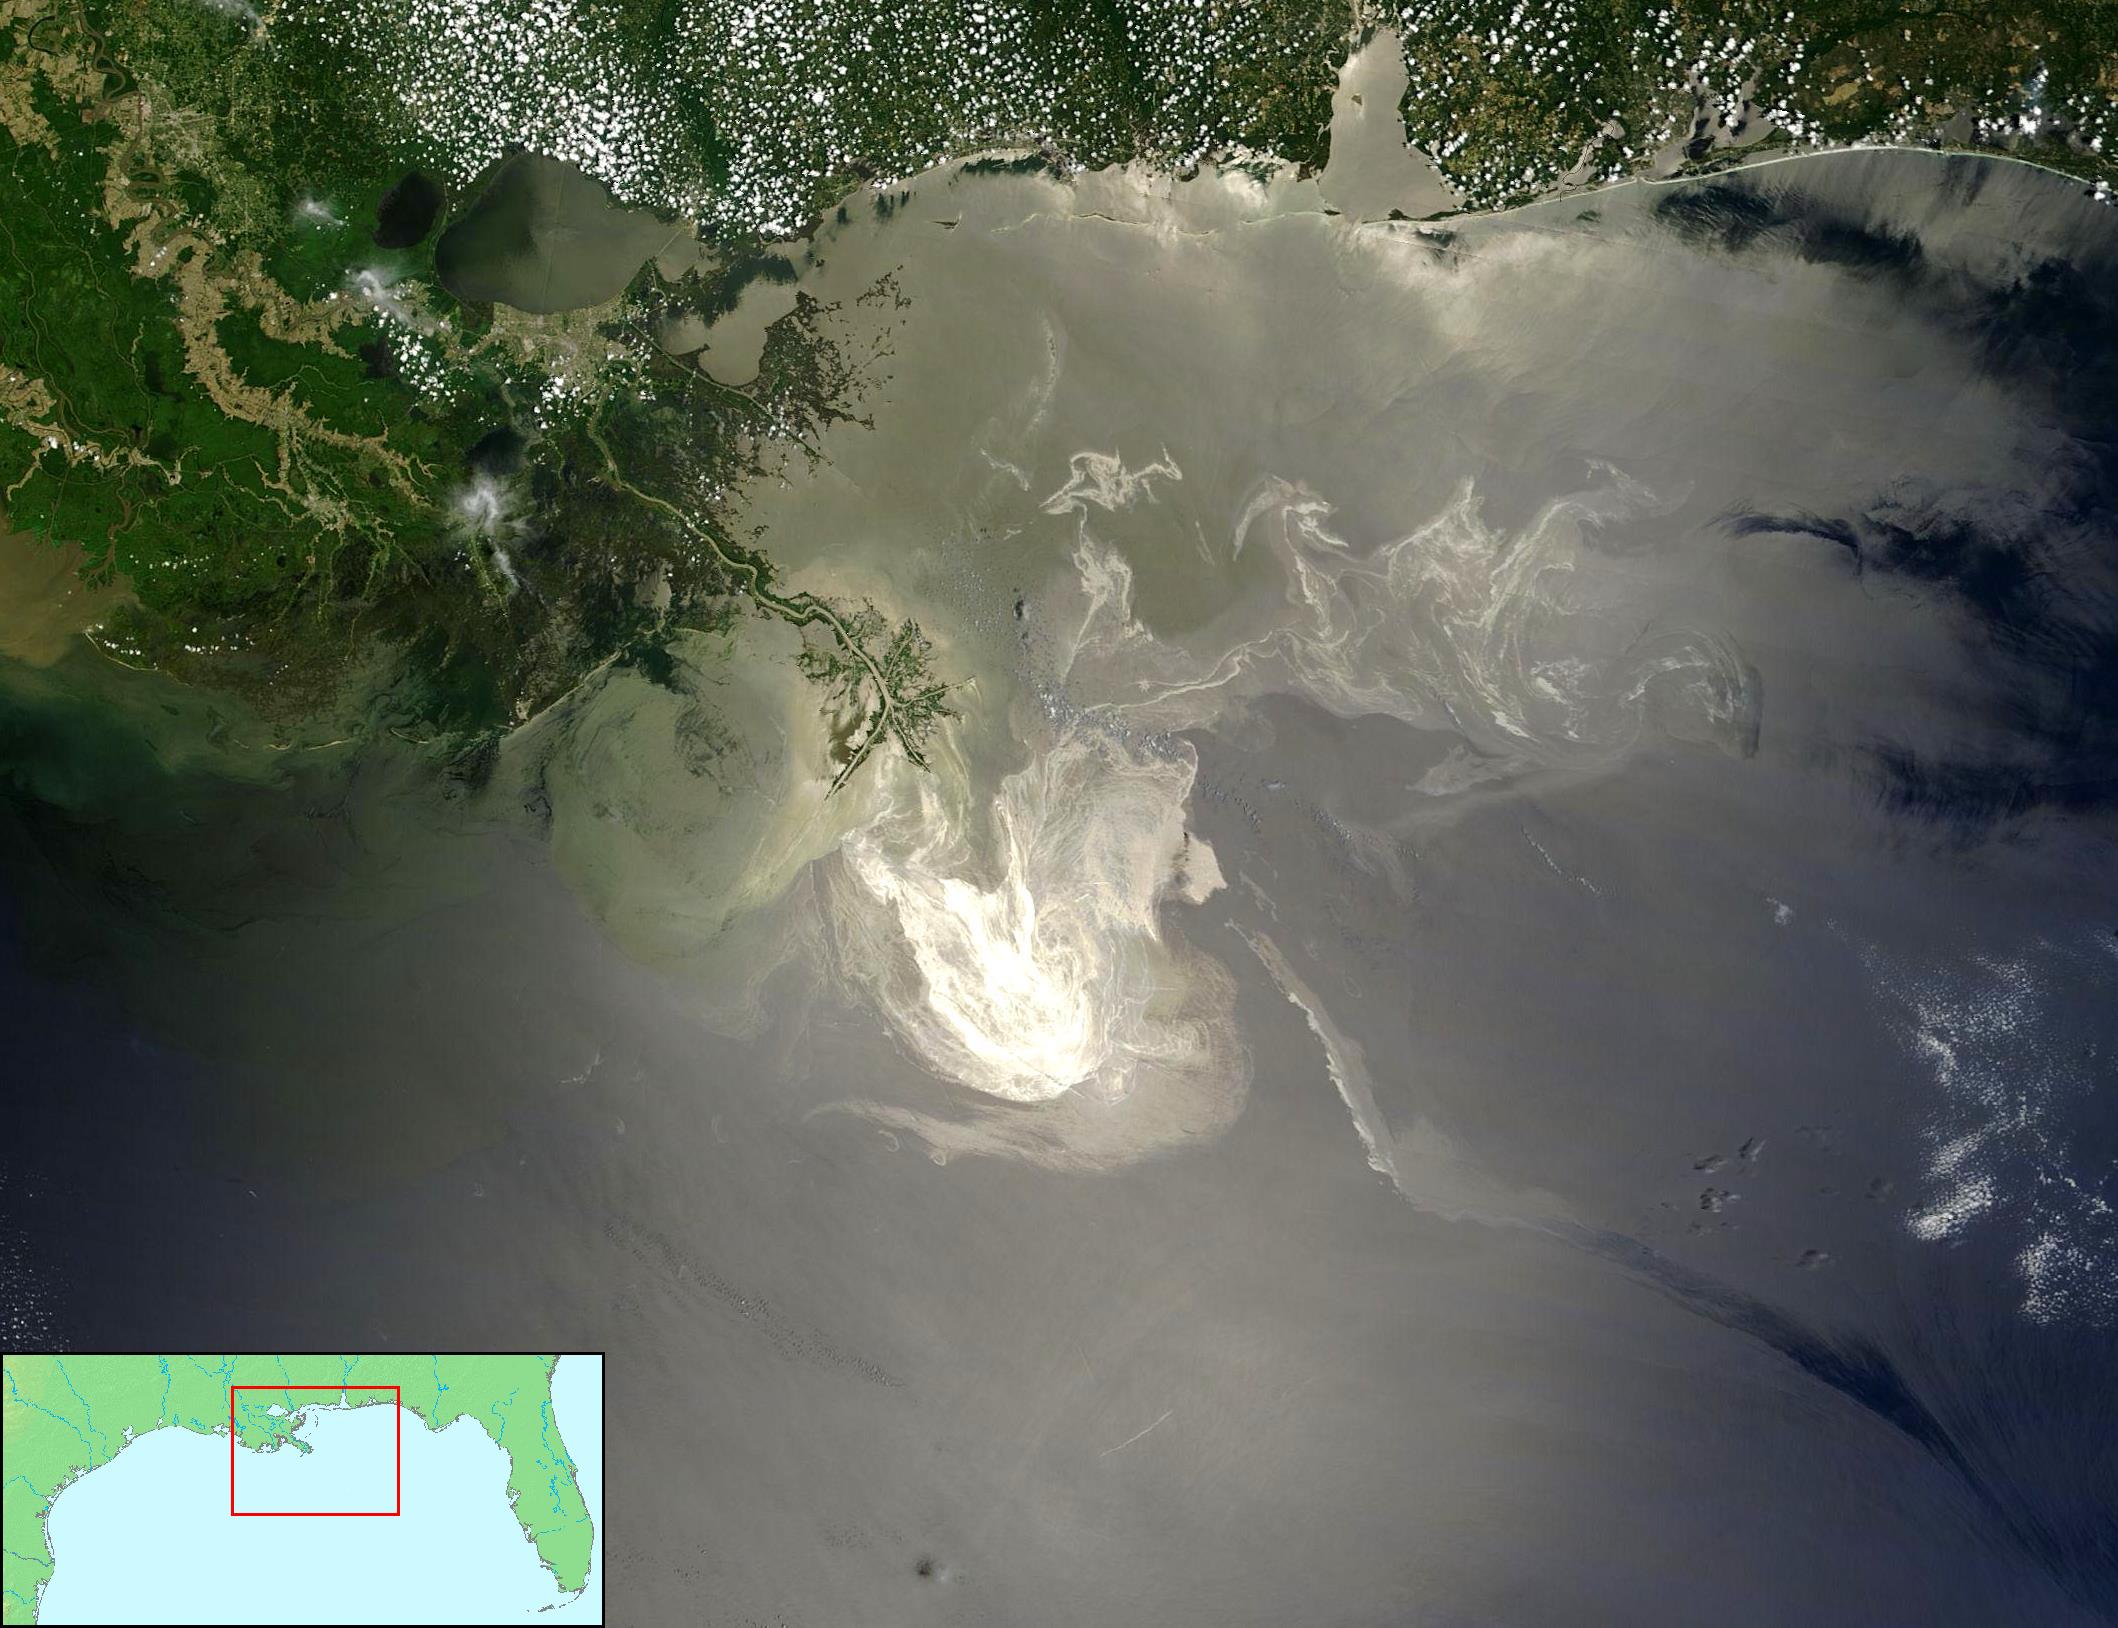 Deepwater Horizon oil spill - May 24, 2010 - with locator